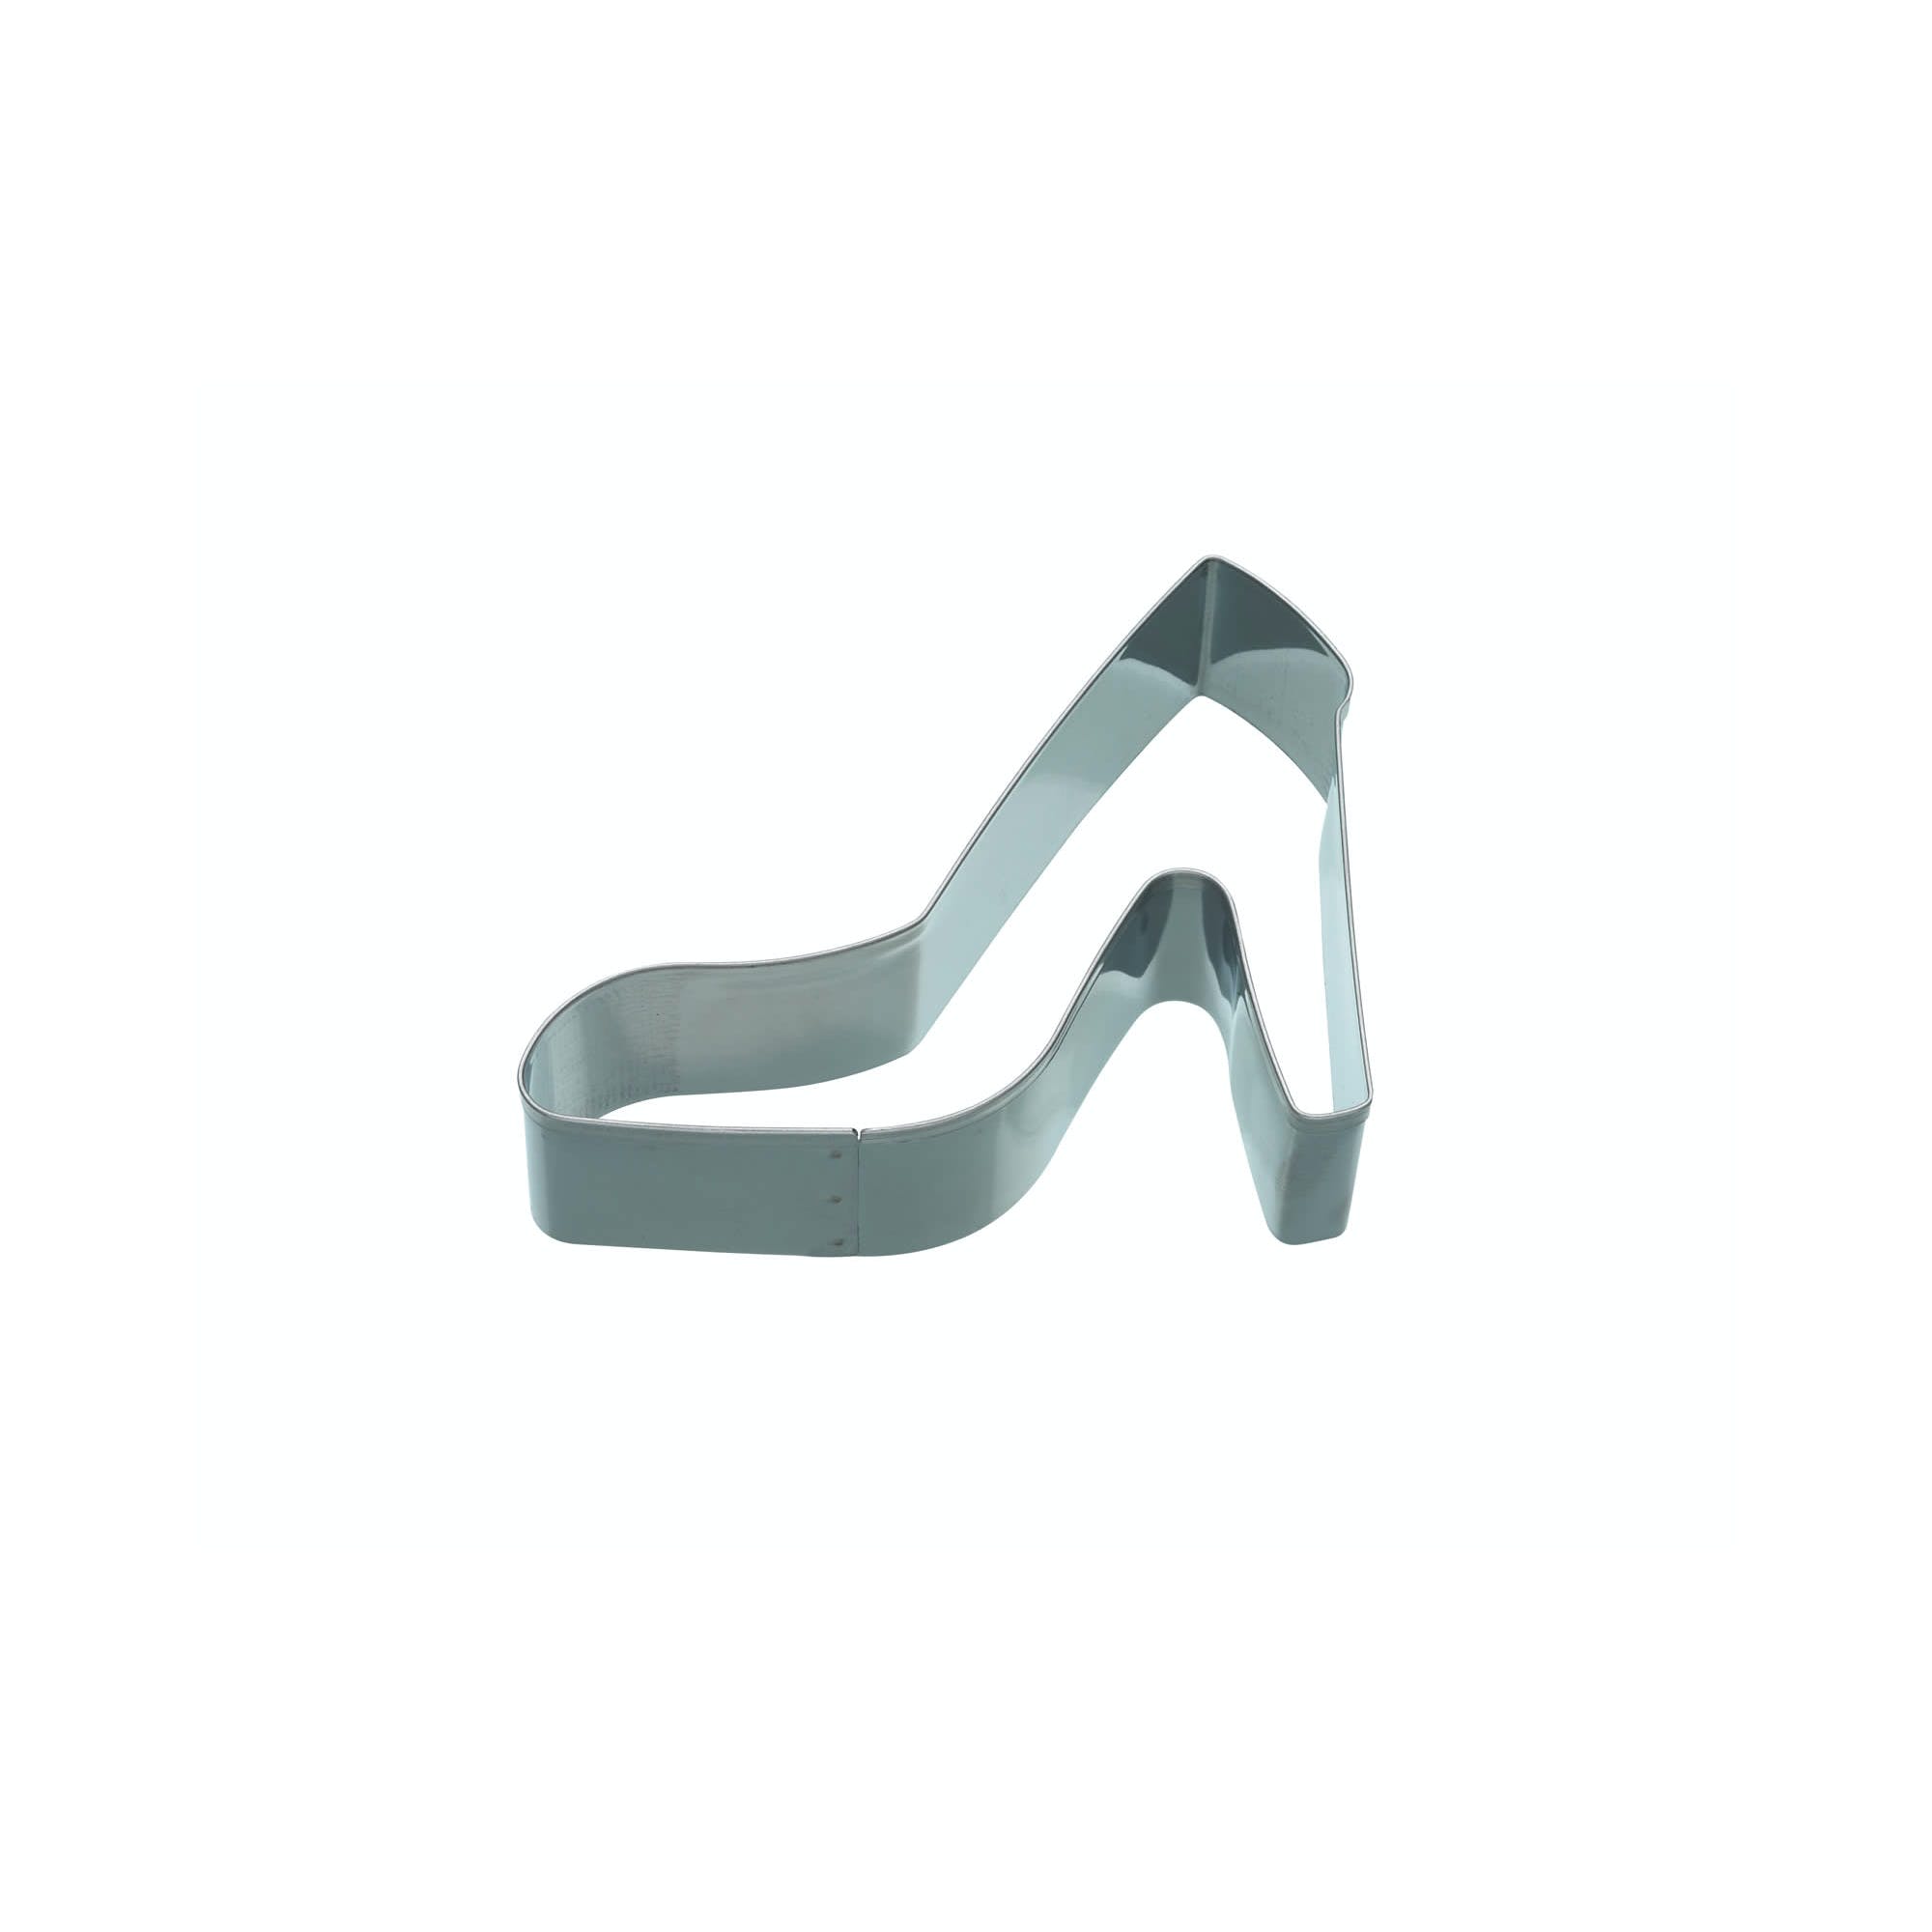 KitchenCraft 9cm Shoe Shaped Cookie Cutter - The Cooks Cupboard Ltd